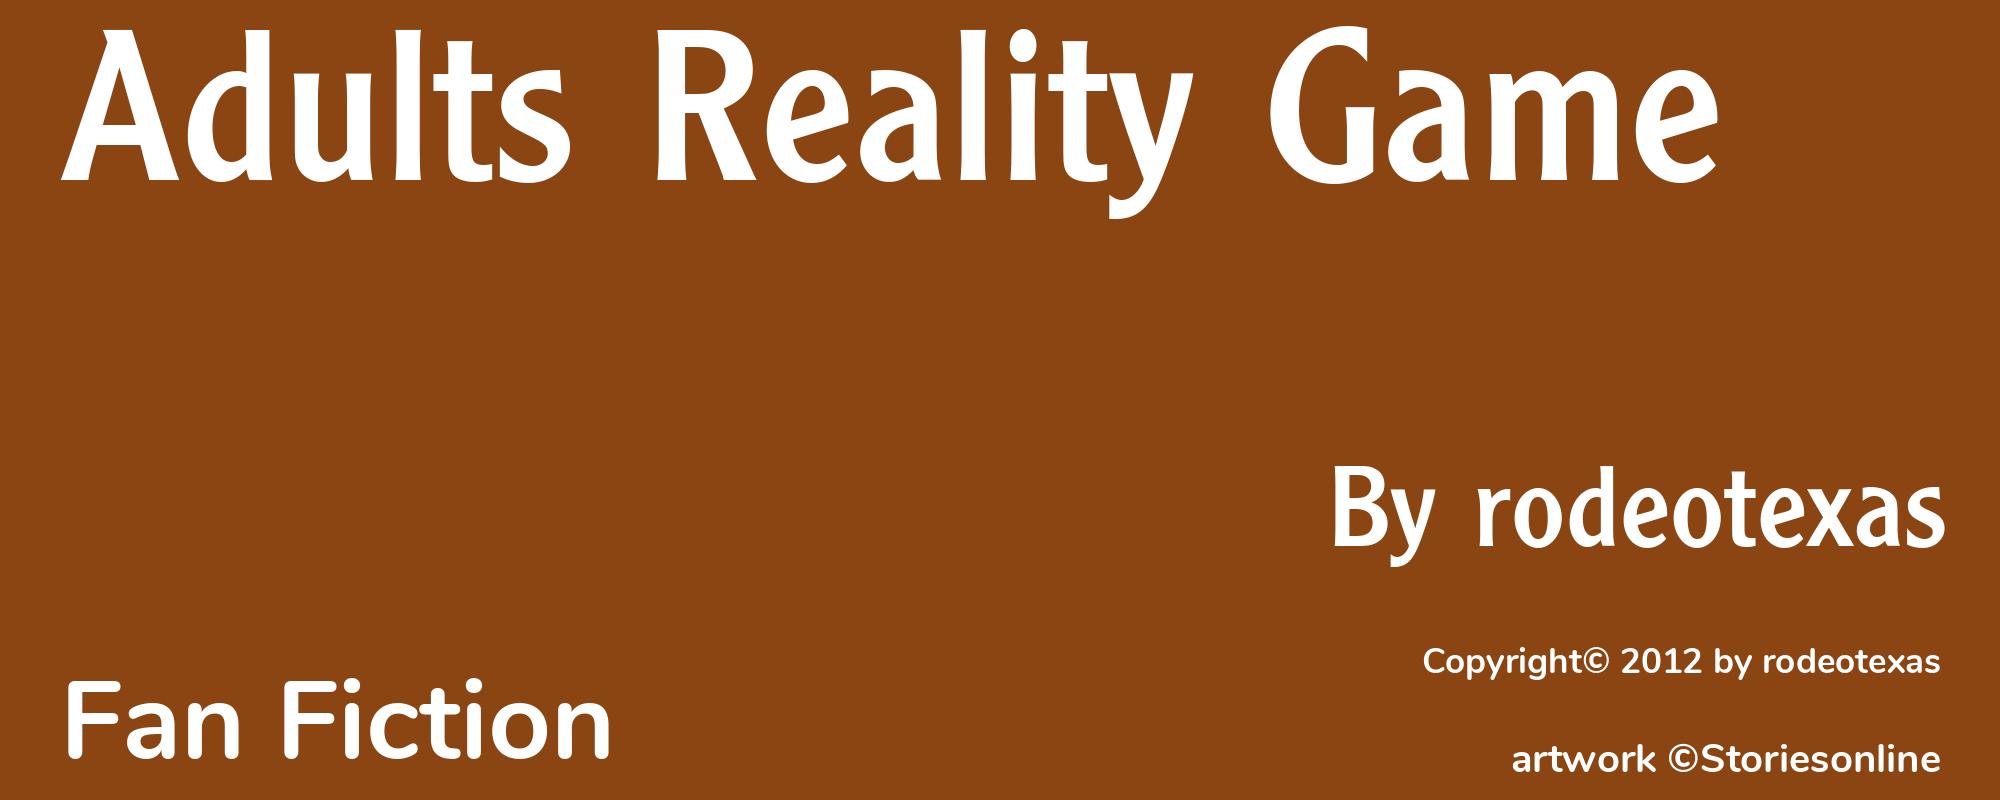 Adults Reality Game - Cover